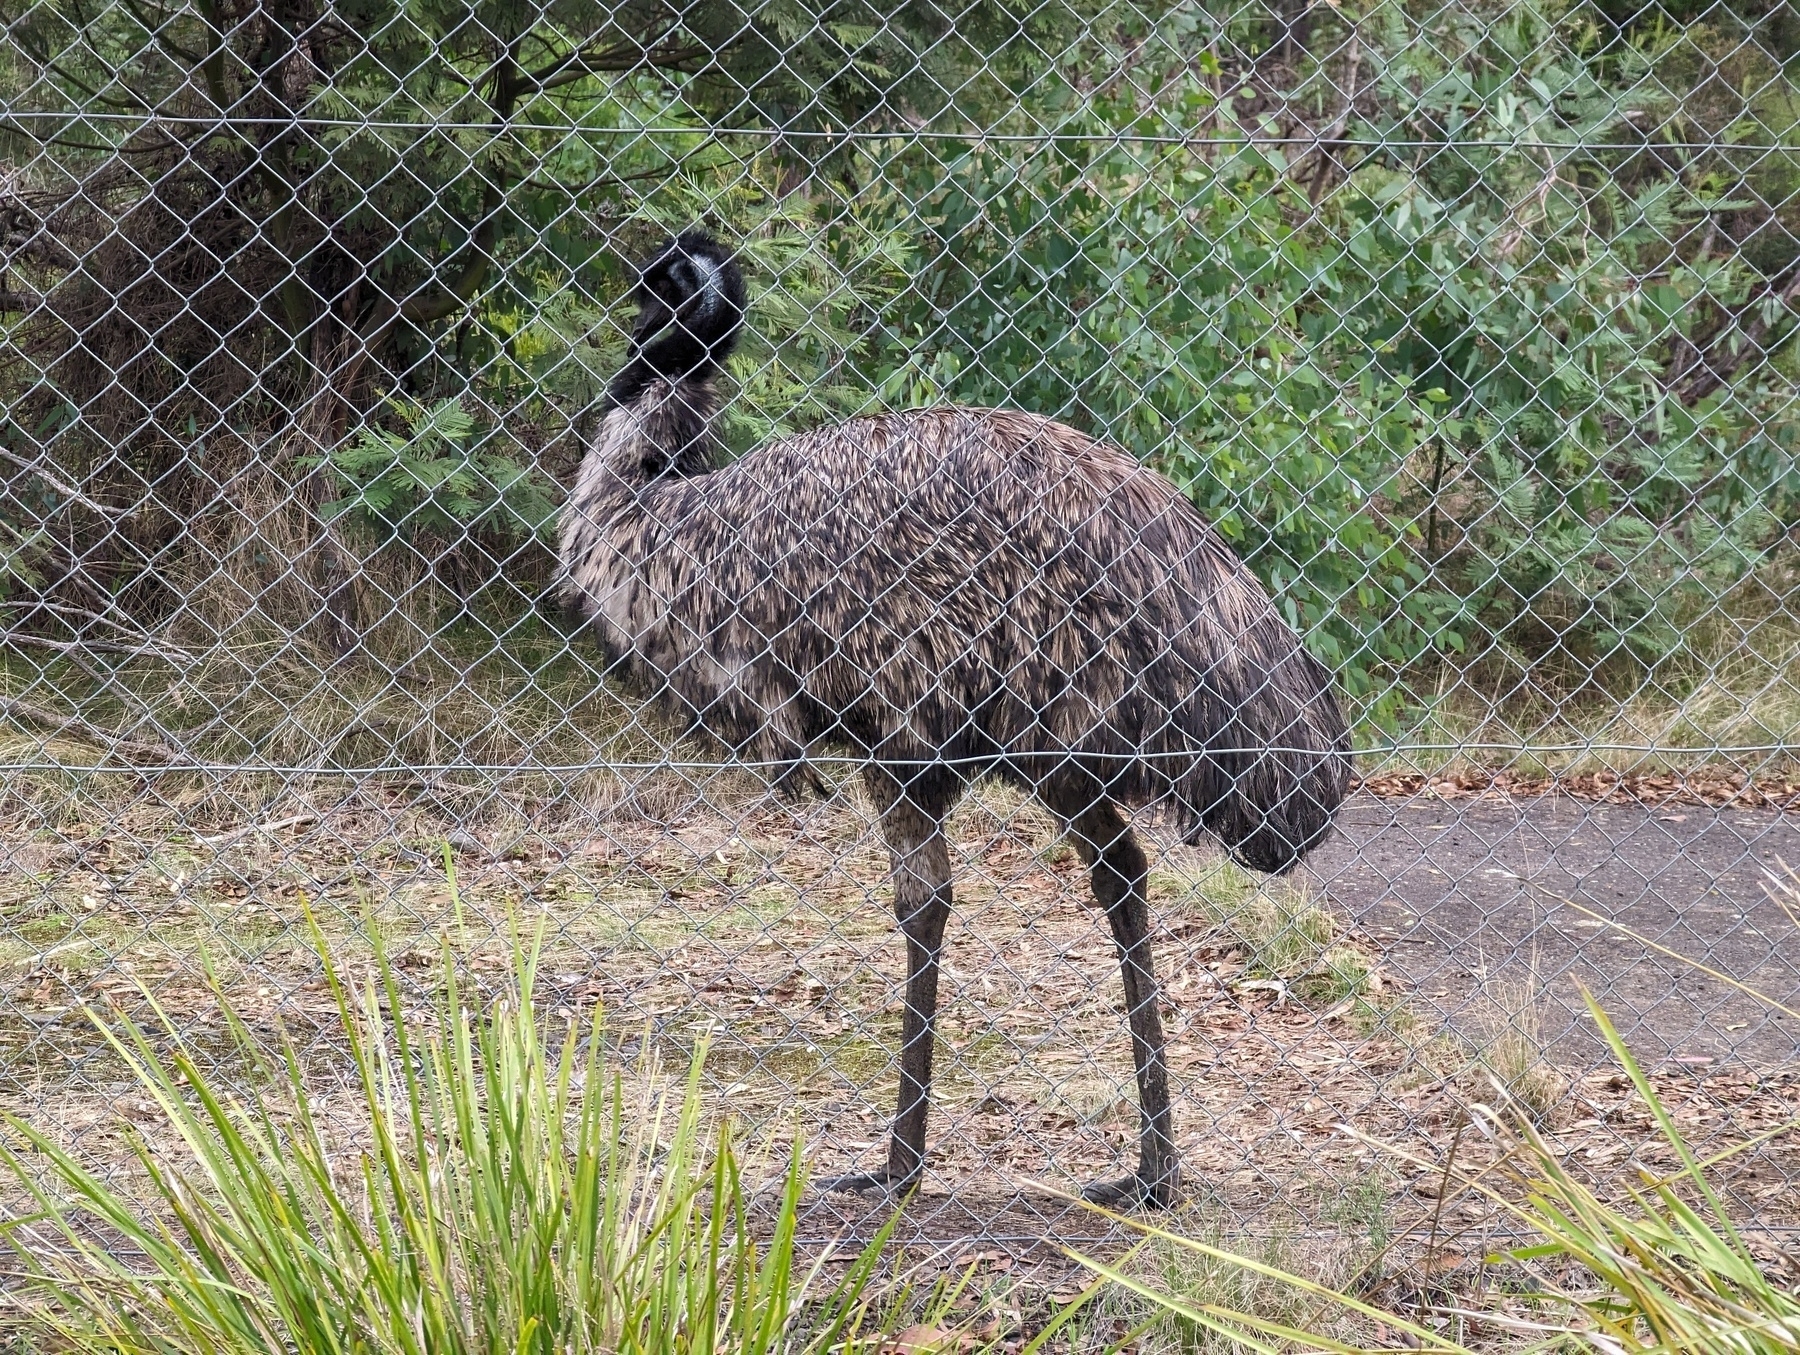 An emu standing by a wire fence.